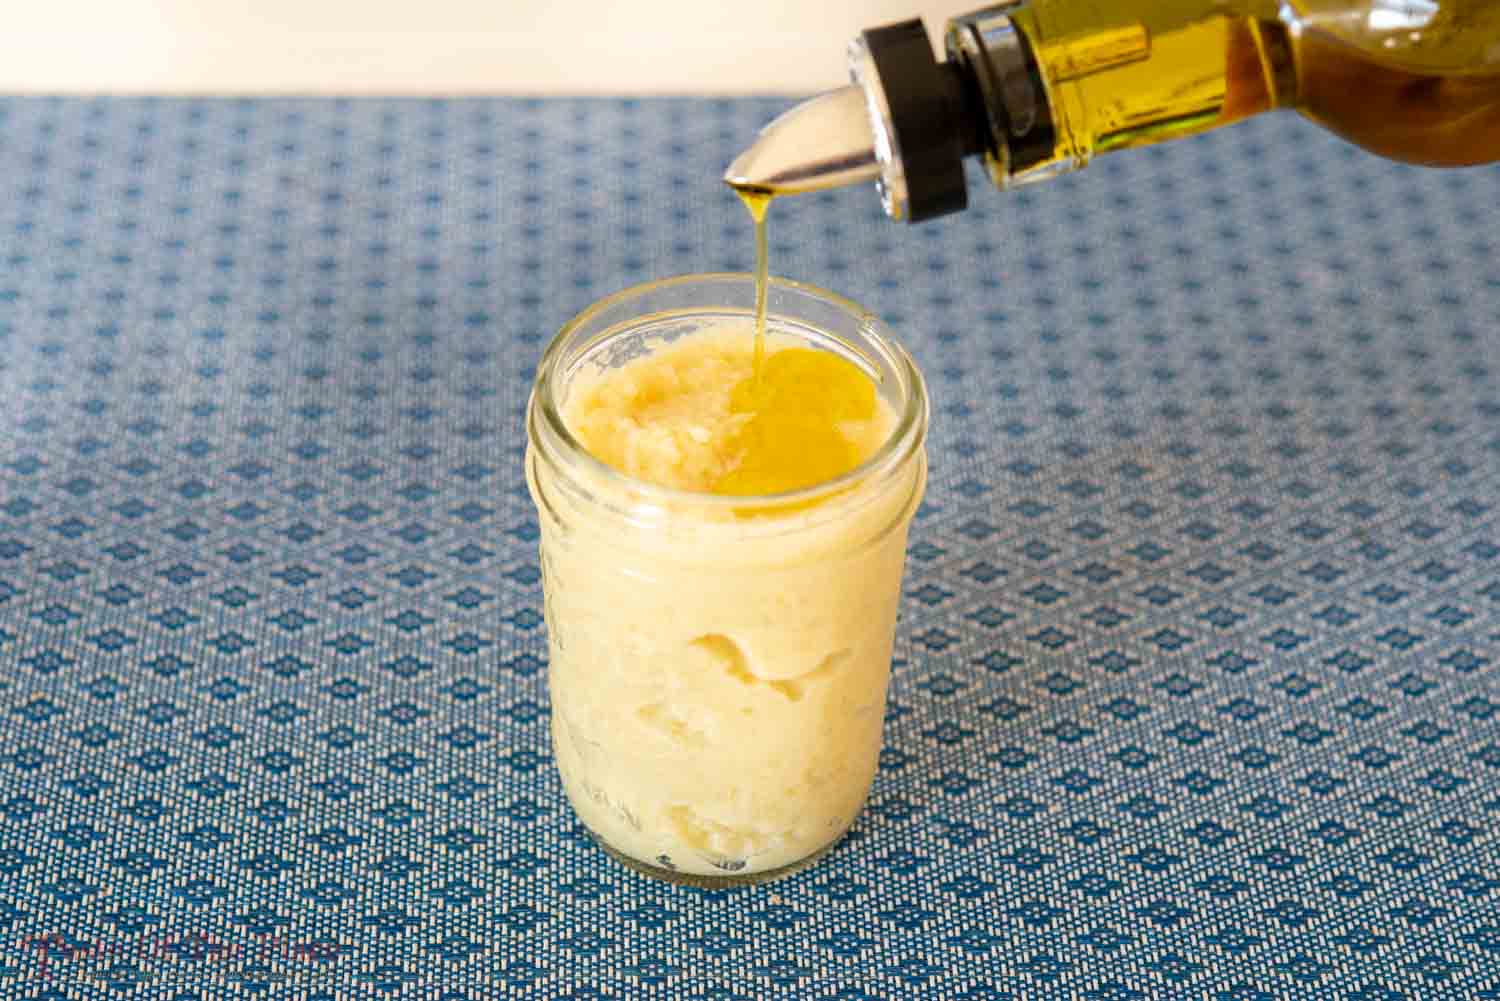 Garlic paste with oil being drizzled on top